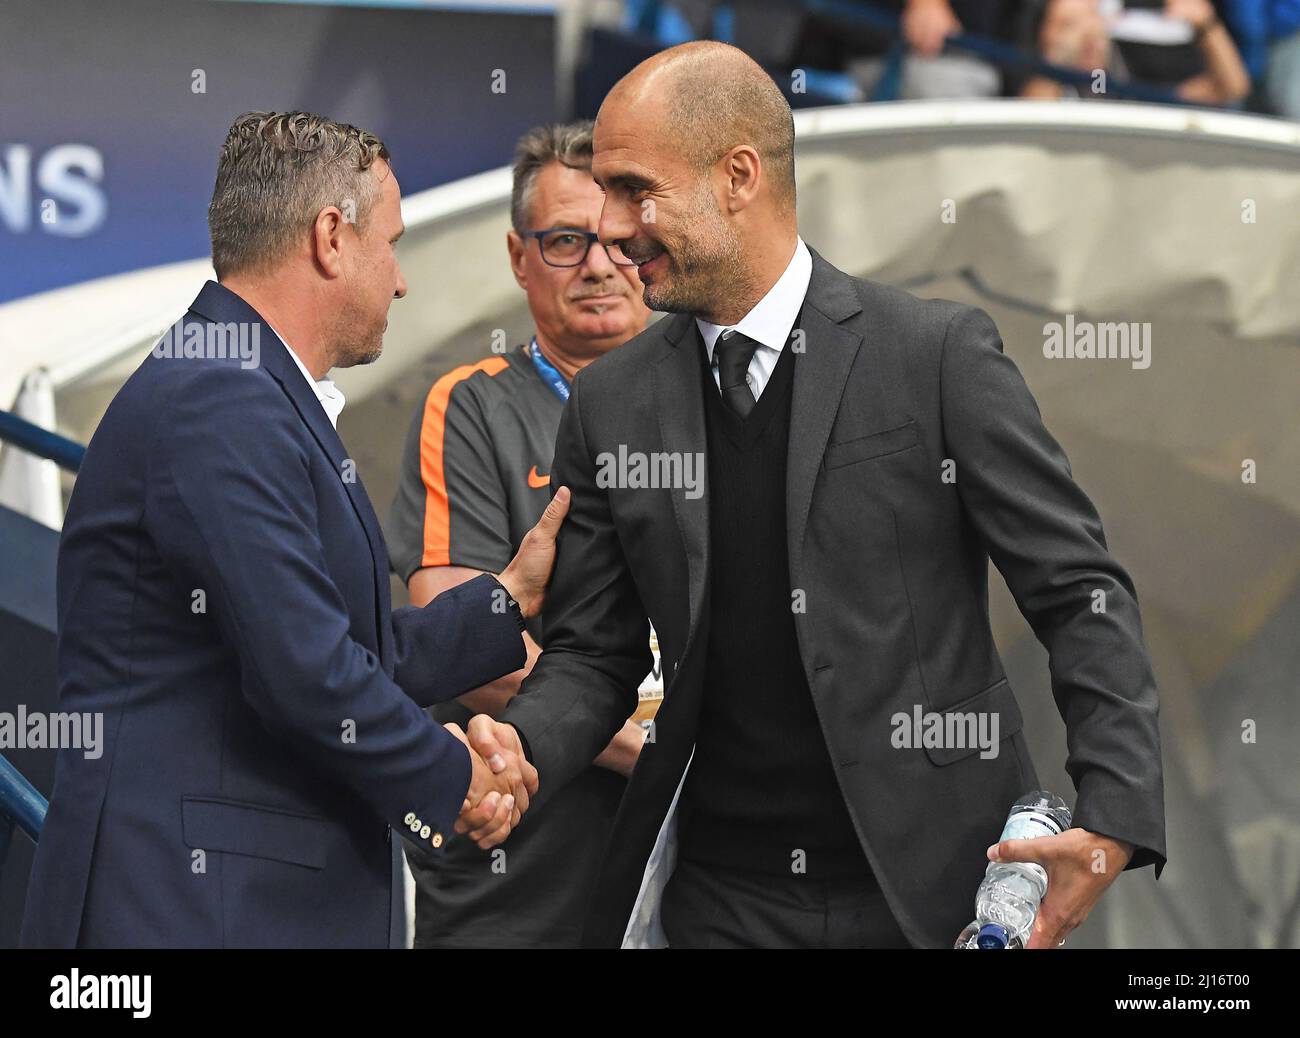 MANCHESTER, ENGLAND - AUGUST 24, 2016: City manager Josep Guardiola (R) greets FCSB head coach Laurentiu Reghecampf (L) prior to the second leg of the 2016/17 UEFA Champions League tie between Manchester City (Engalnd) and FCSB (Romania) at Etihad Stadium. Copyright: Cosmin Iftode/Picstaff Stock Photo